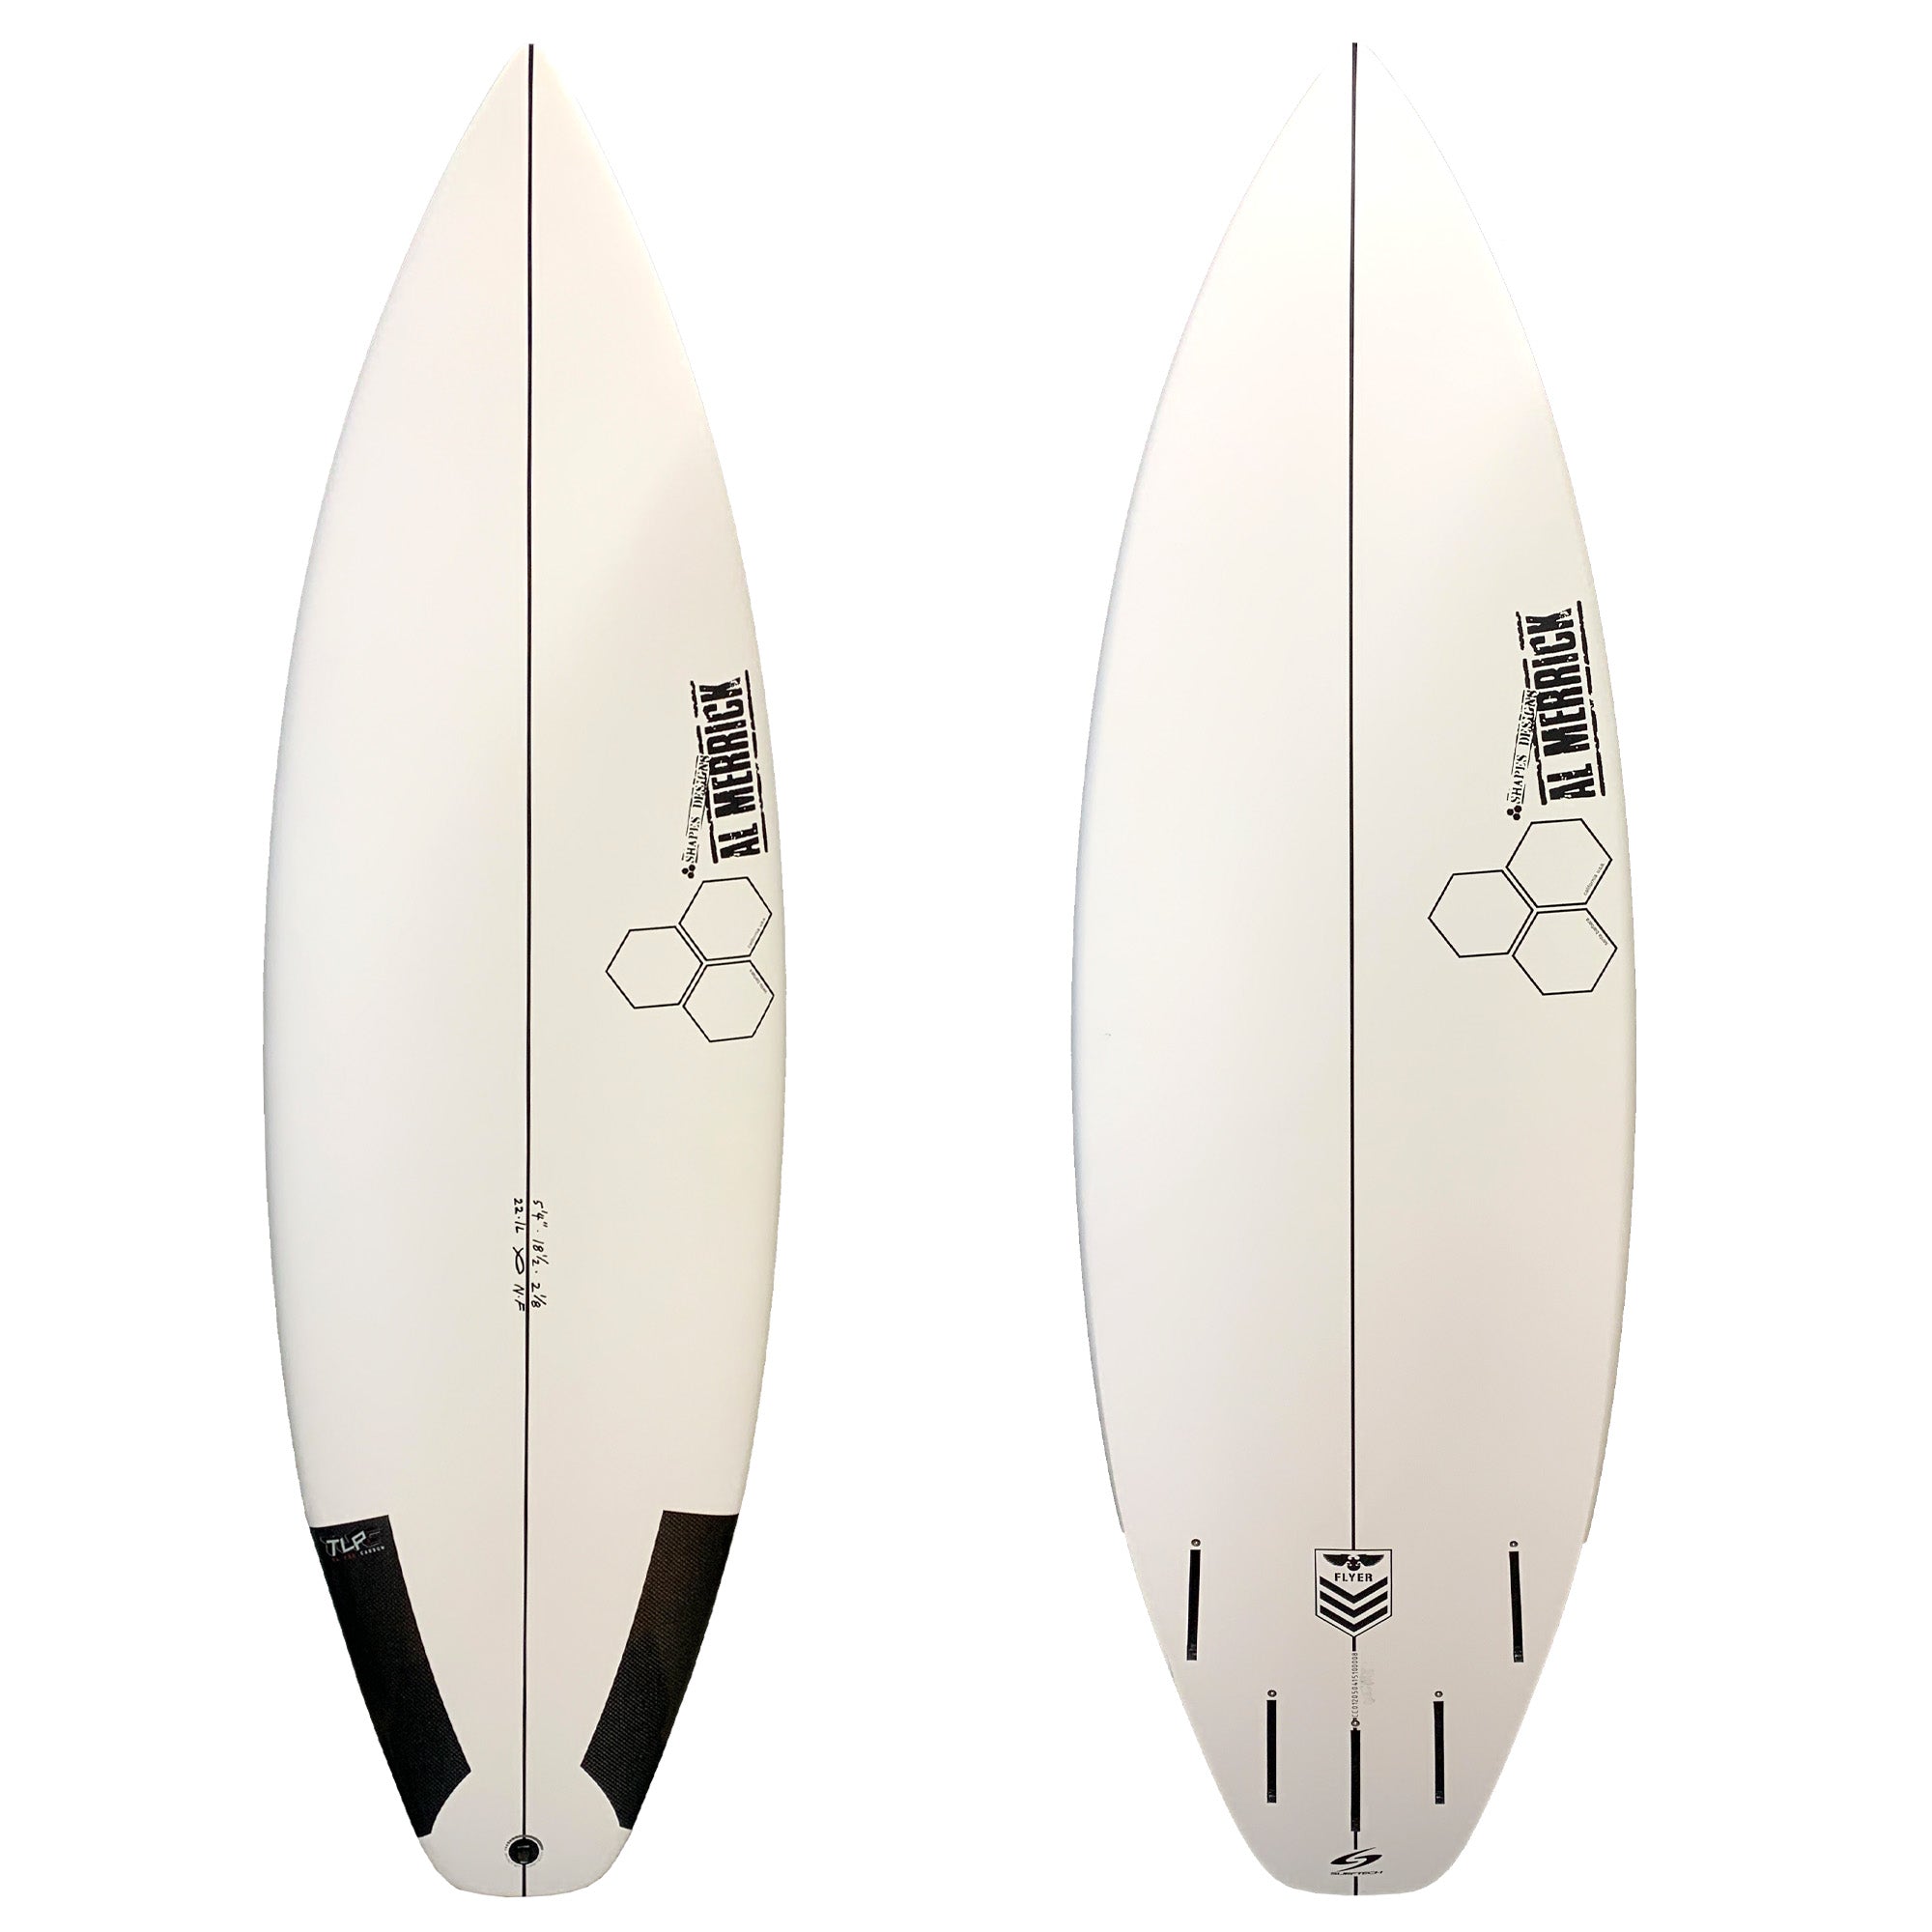 Channel Islands New Flyer TL Pro Carbon Surfboard - Futures